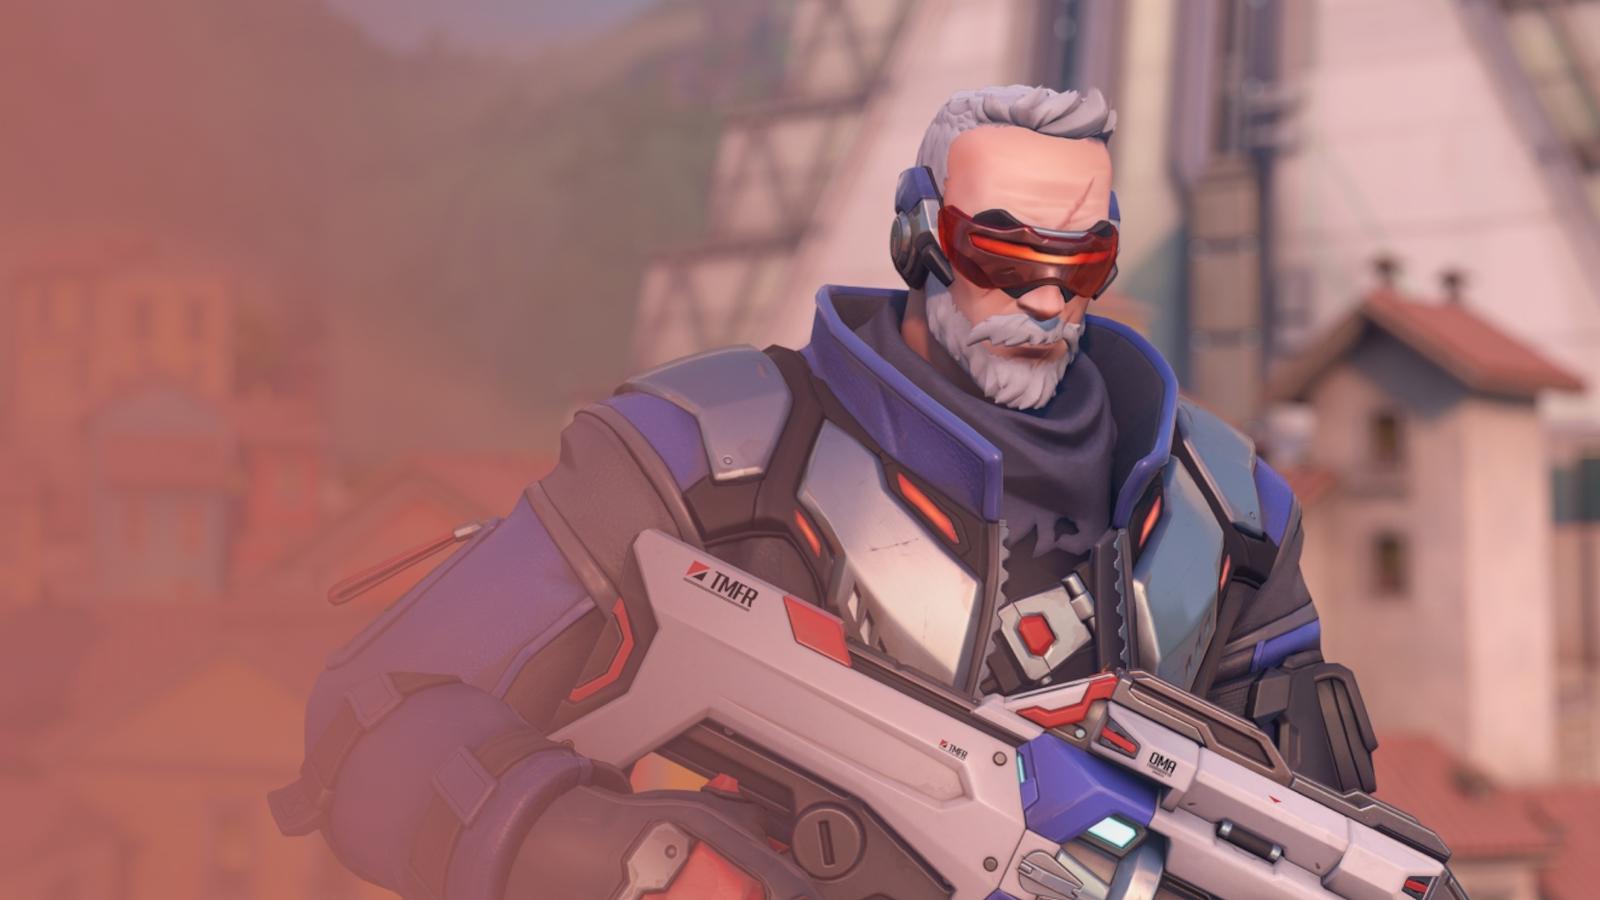 Solider 76 from Overwatch 2